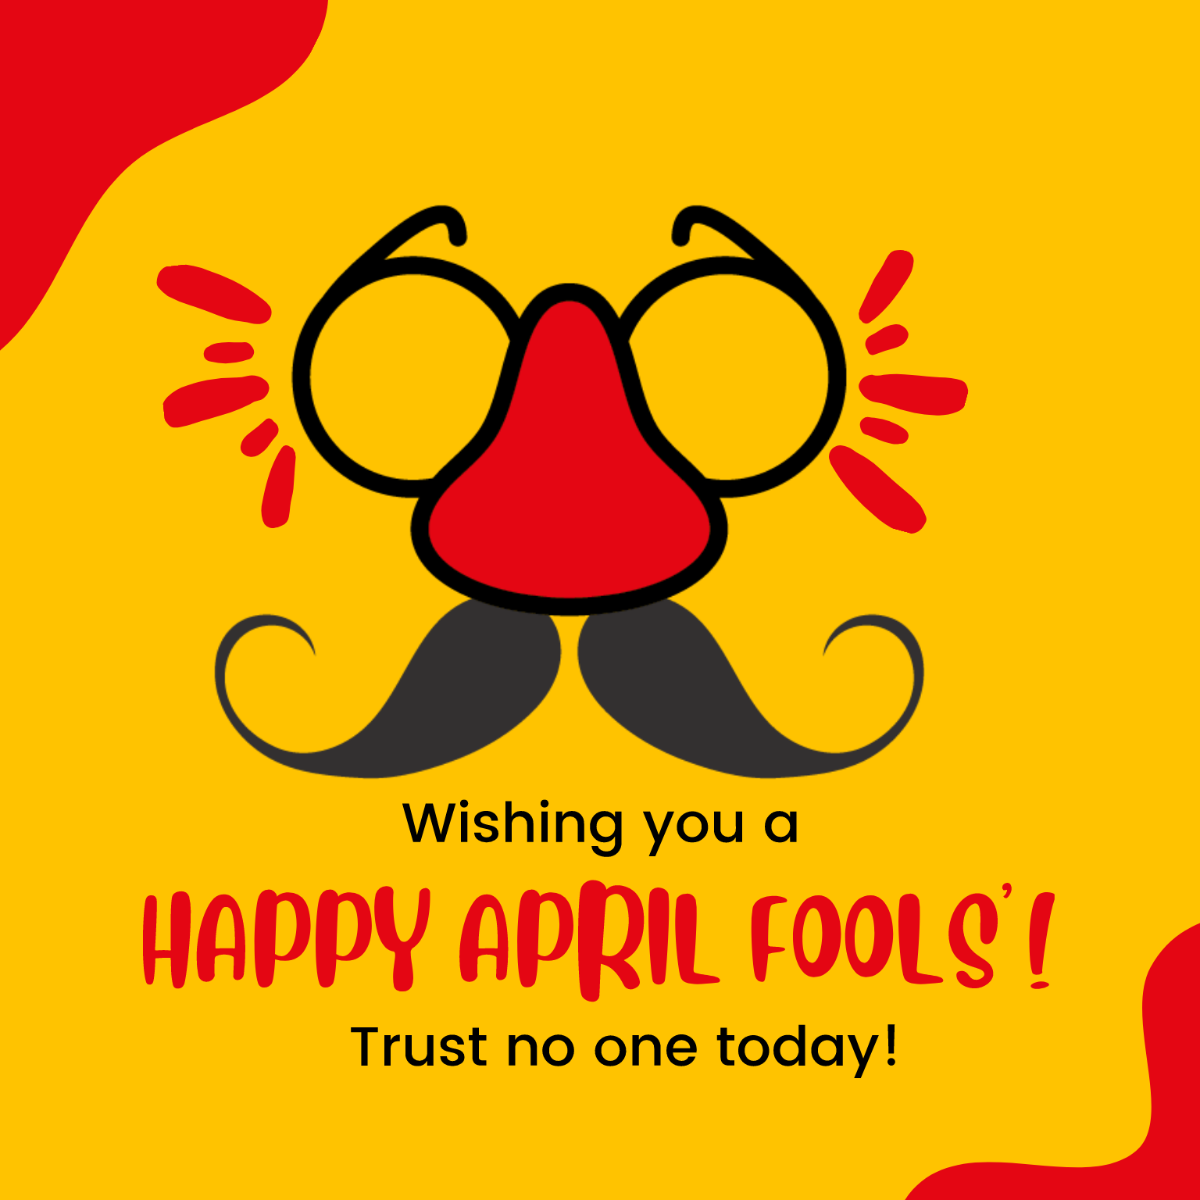 April Fools' Day Wishes Vector